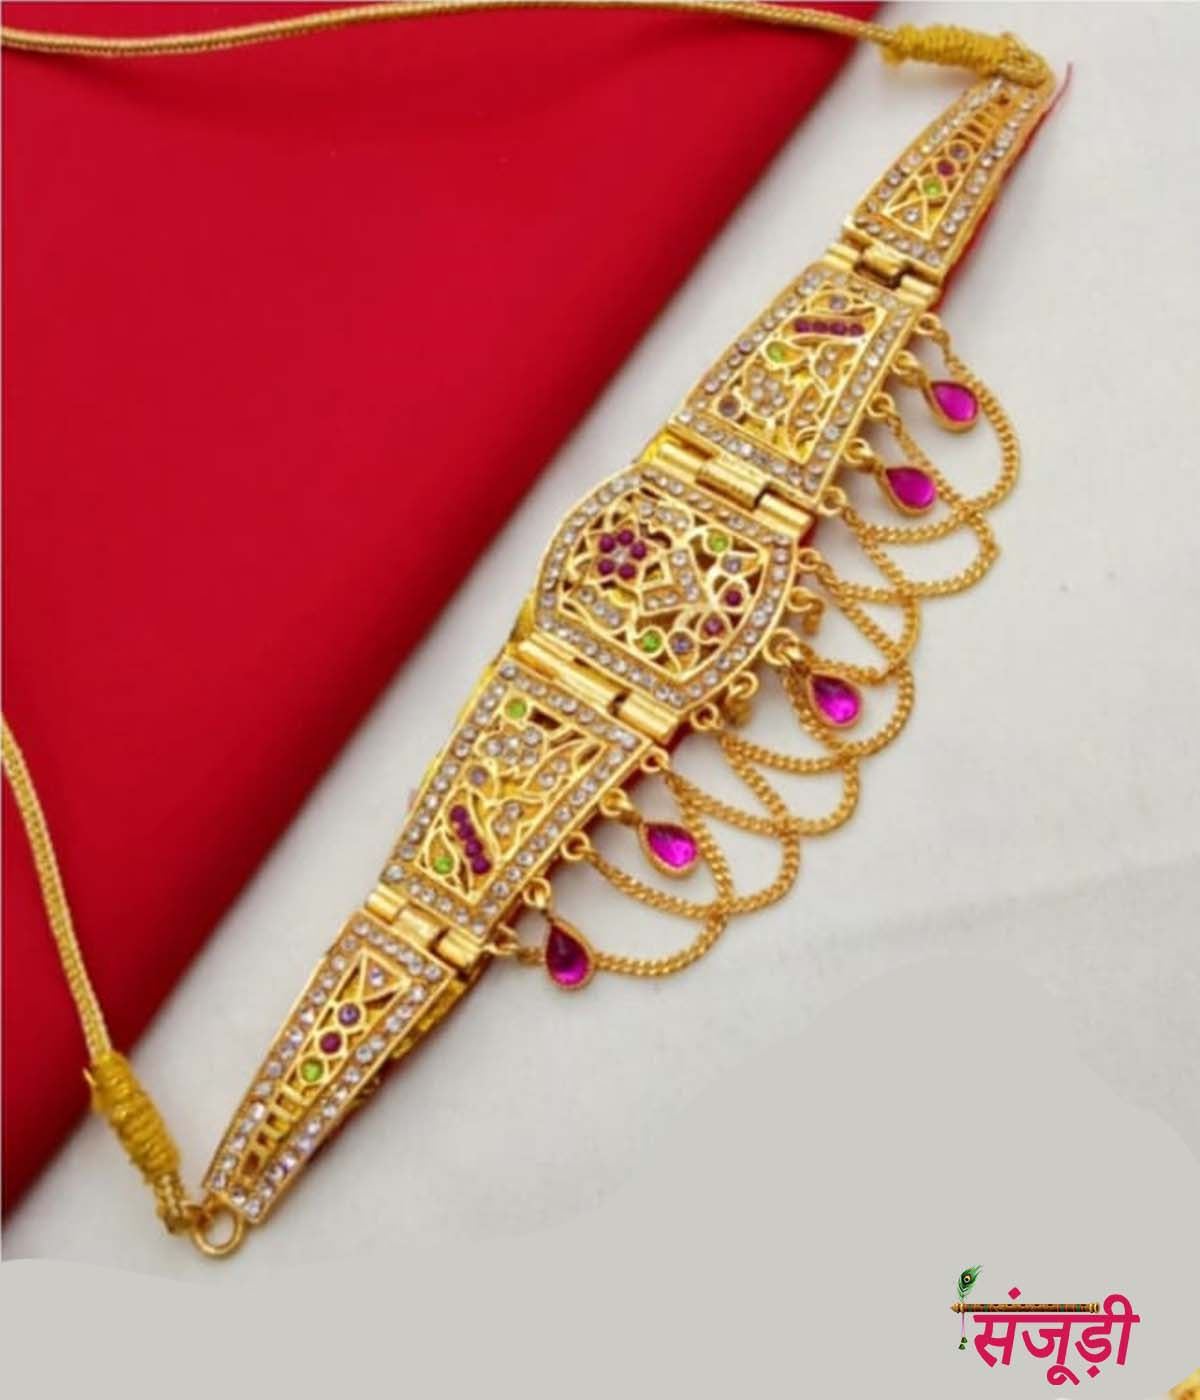 Fancy Rajasthani Bajuband with Pink and White Stones 